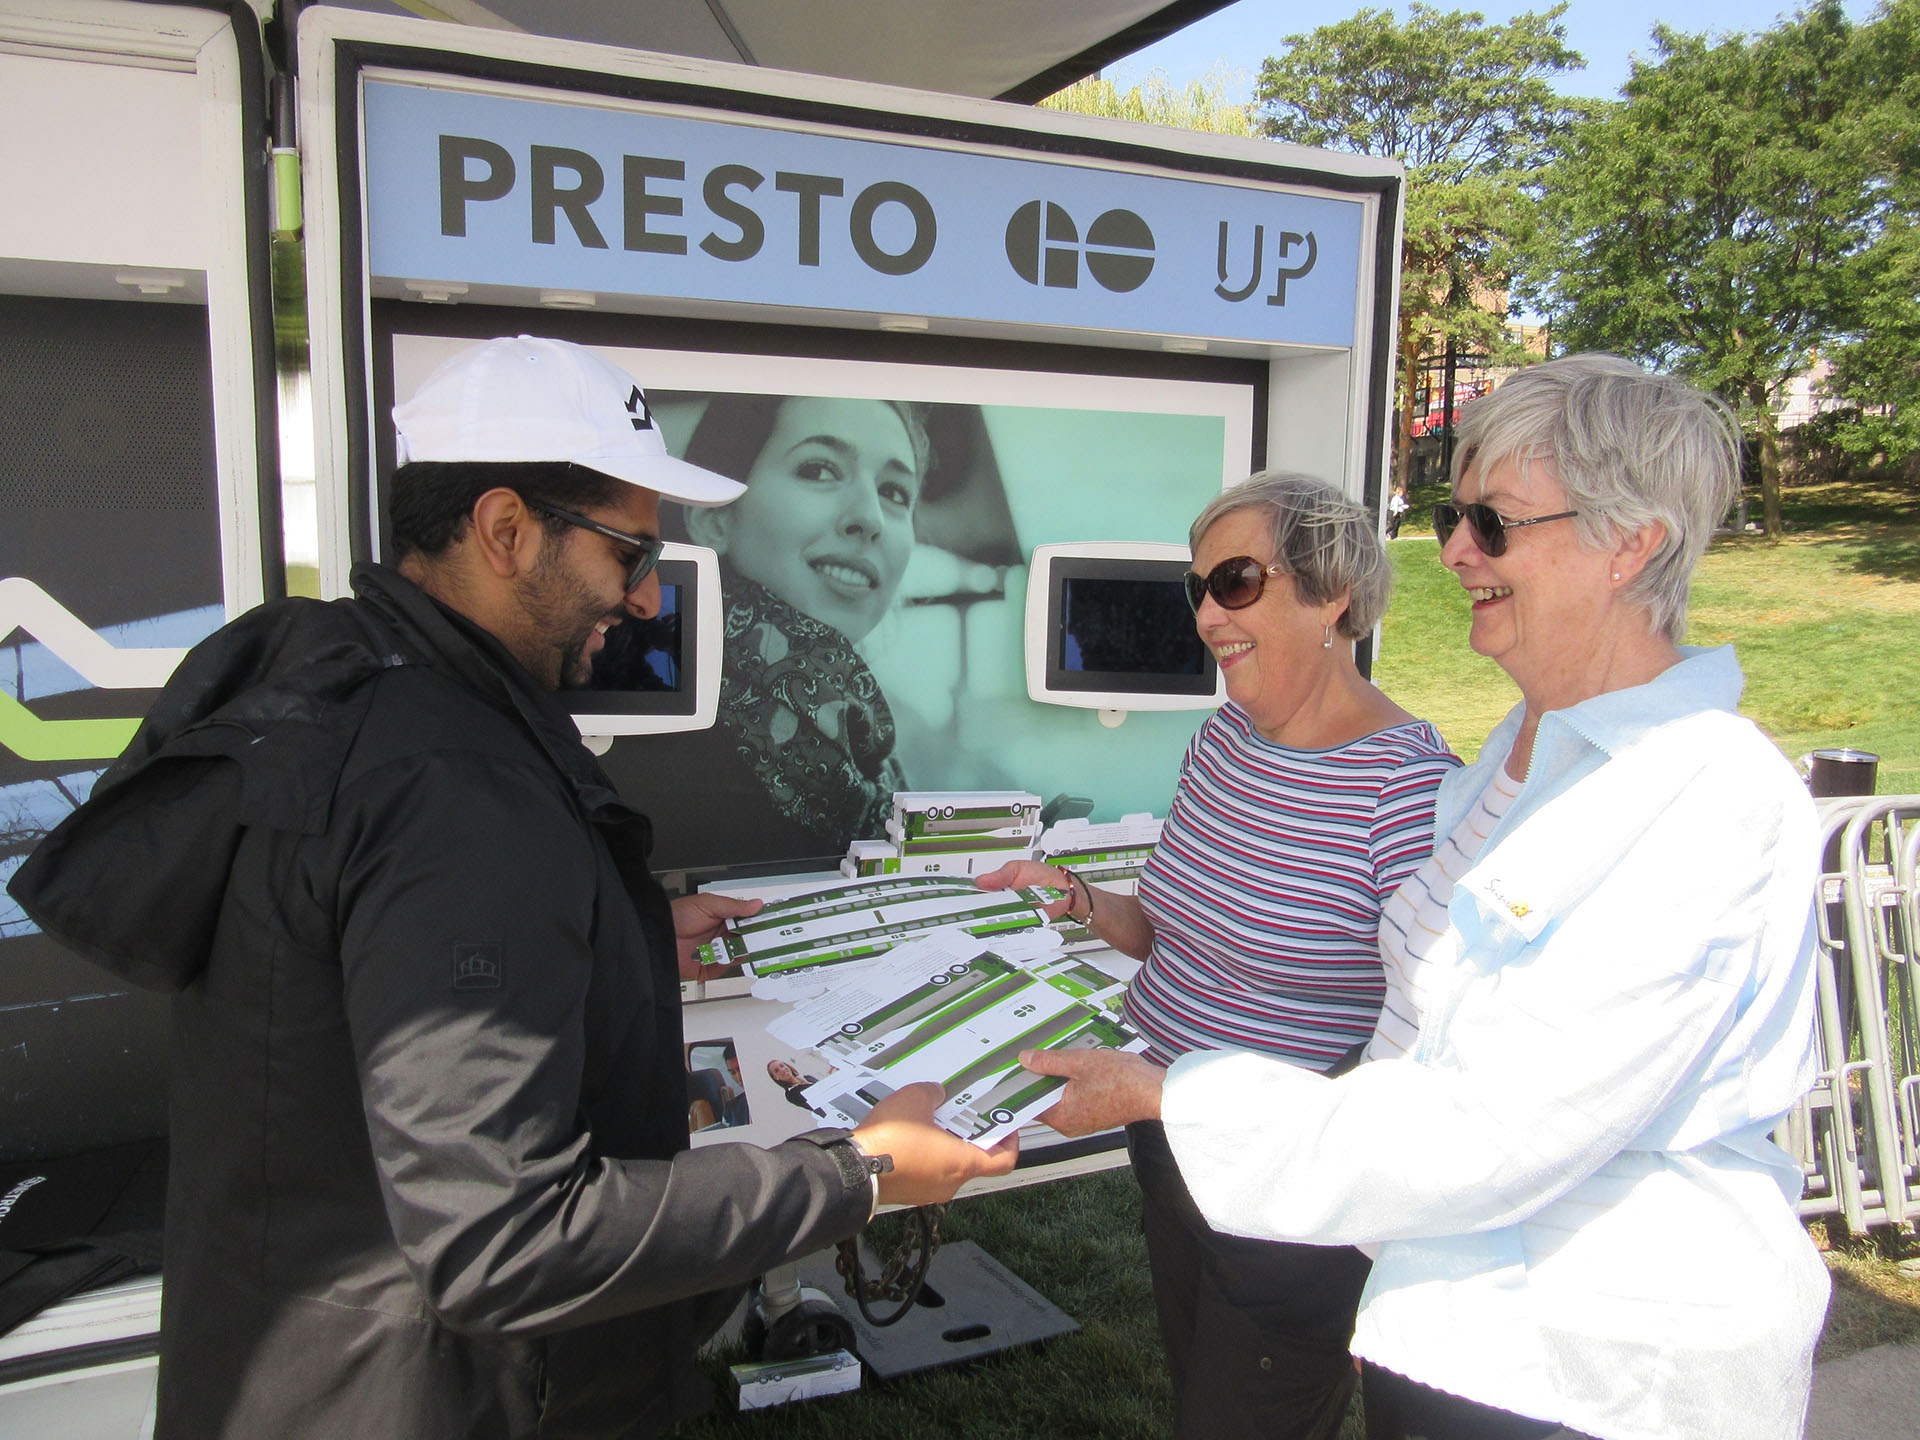 People interacting with a brand ambassador at a Metrolinx activation